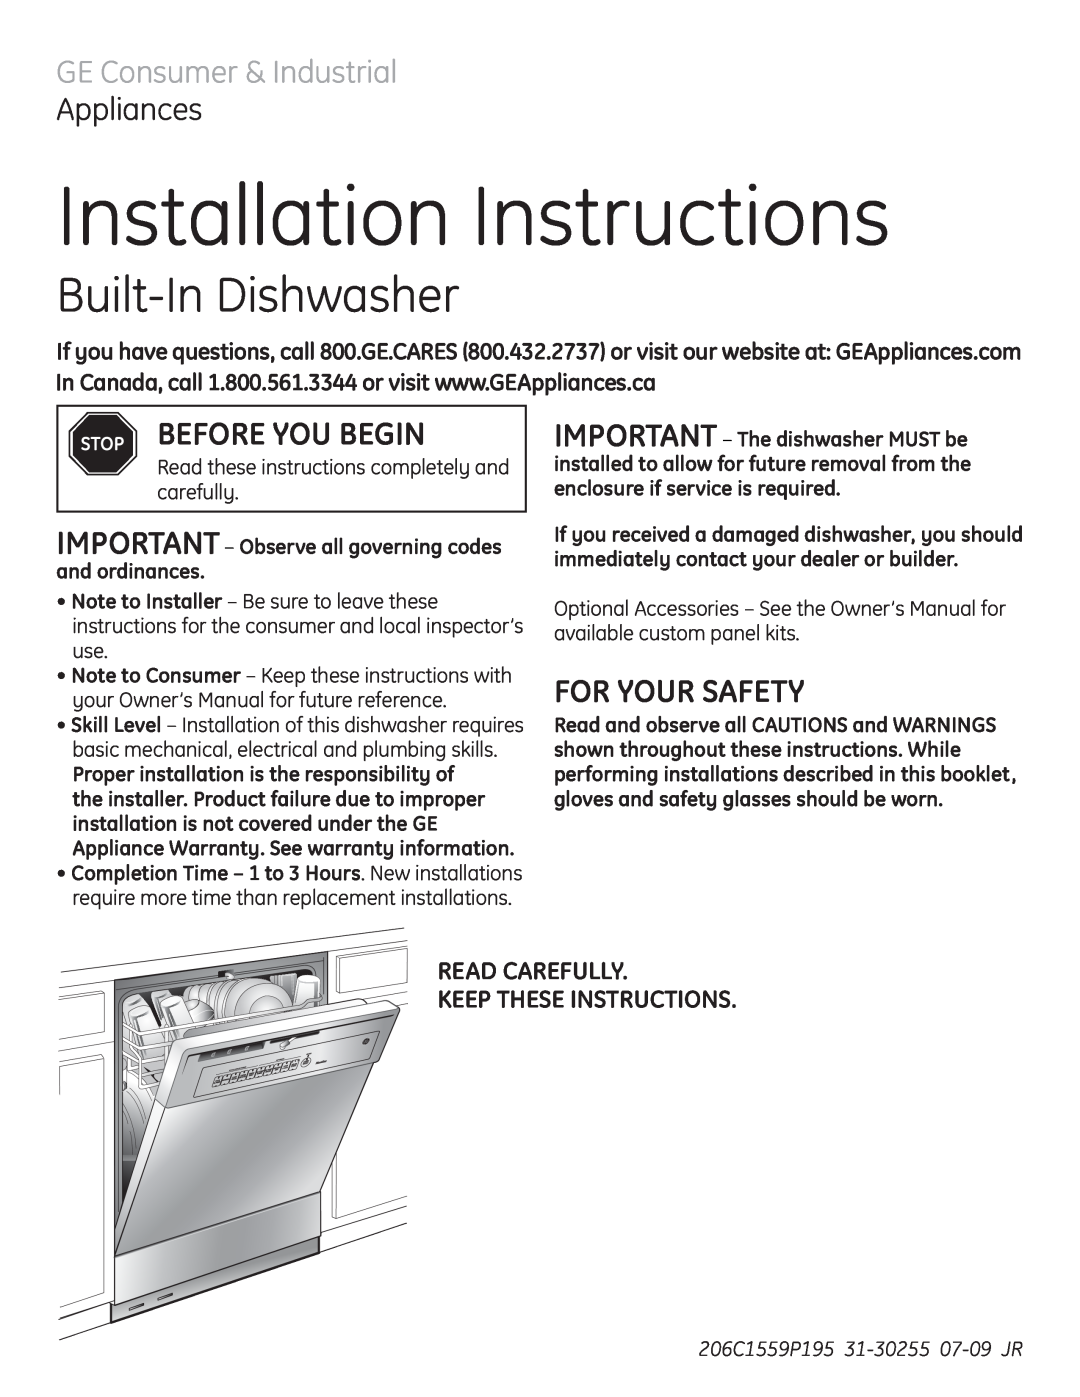 GE 206C1559P195 installation instructions Installation Instructions, Built-InDishwasher, Appliances, Before You Begin 